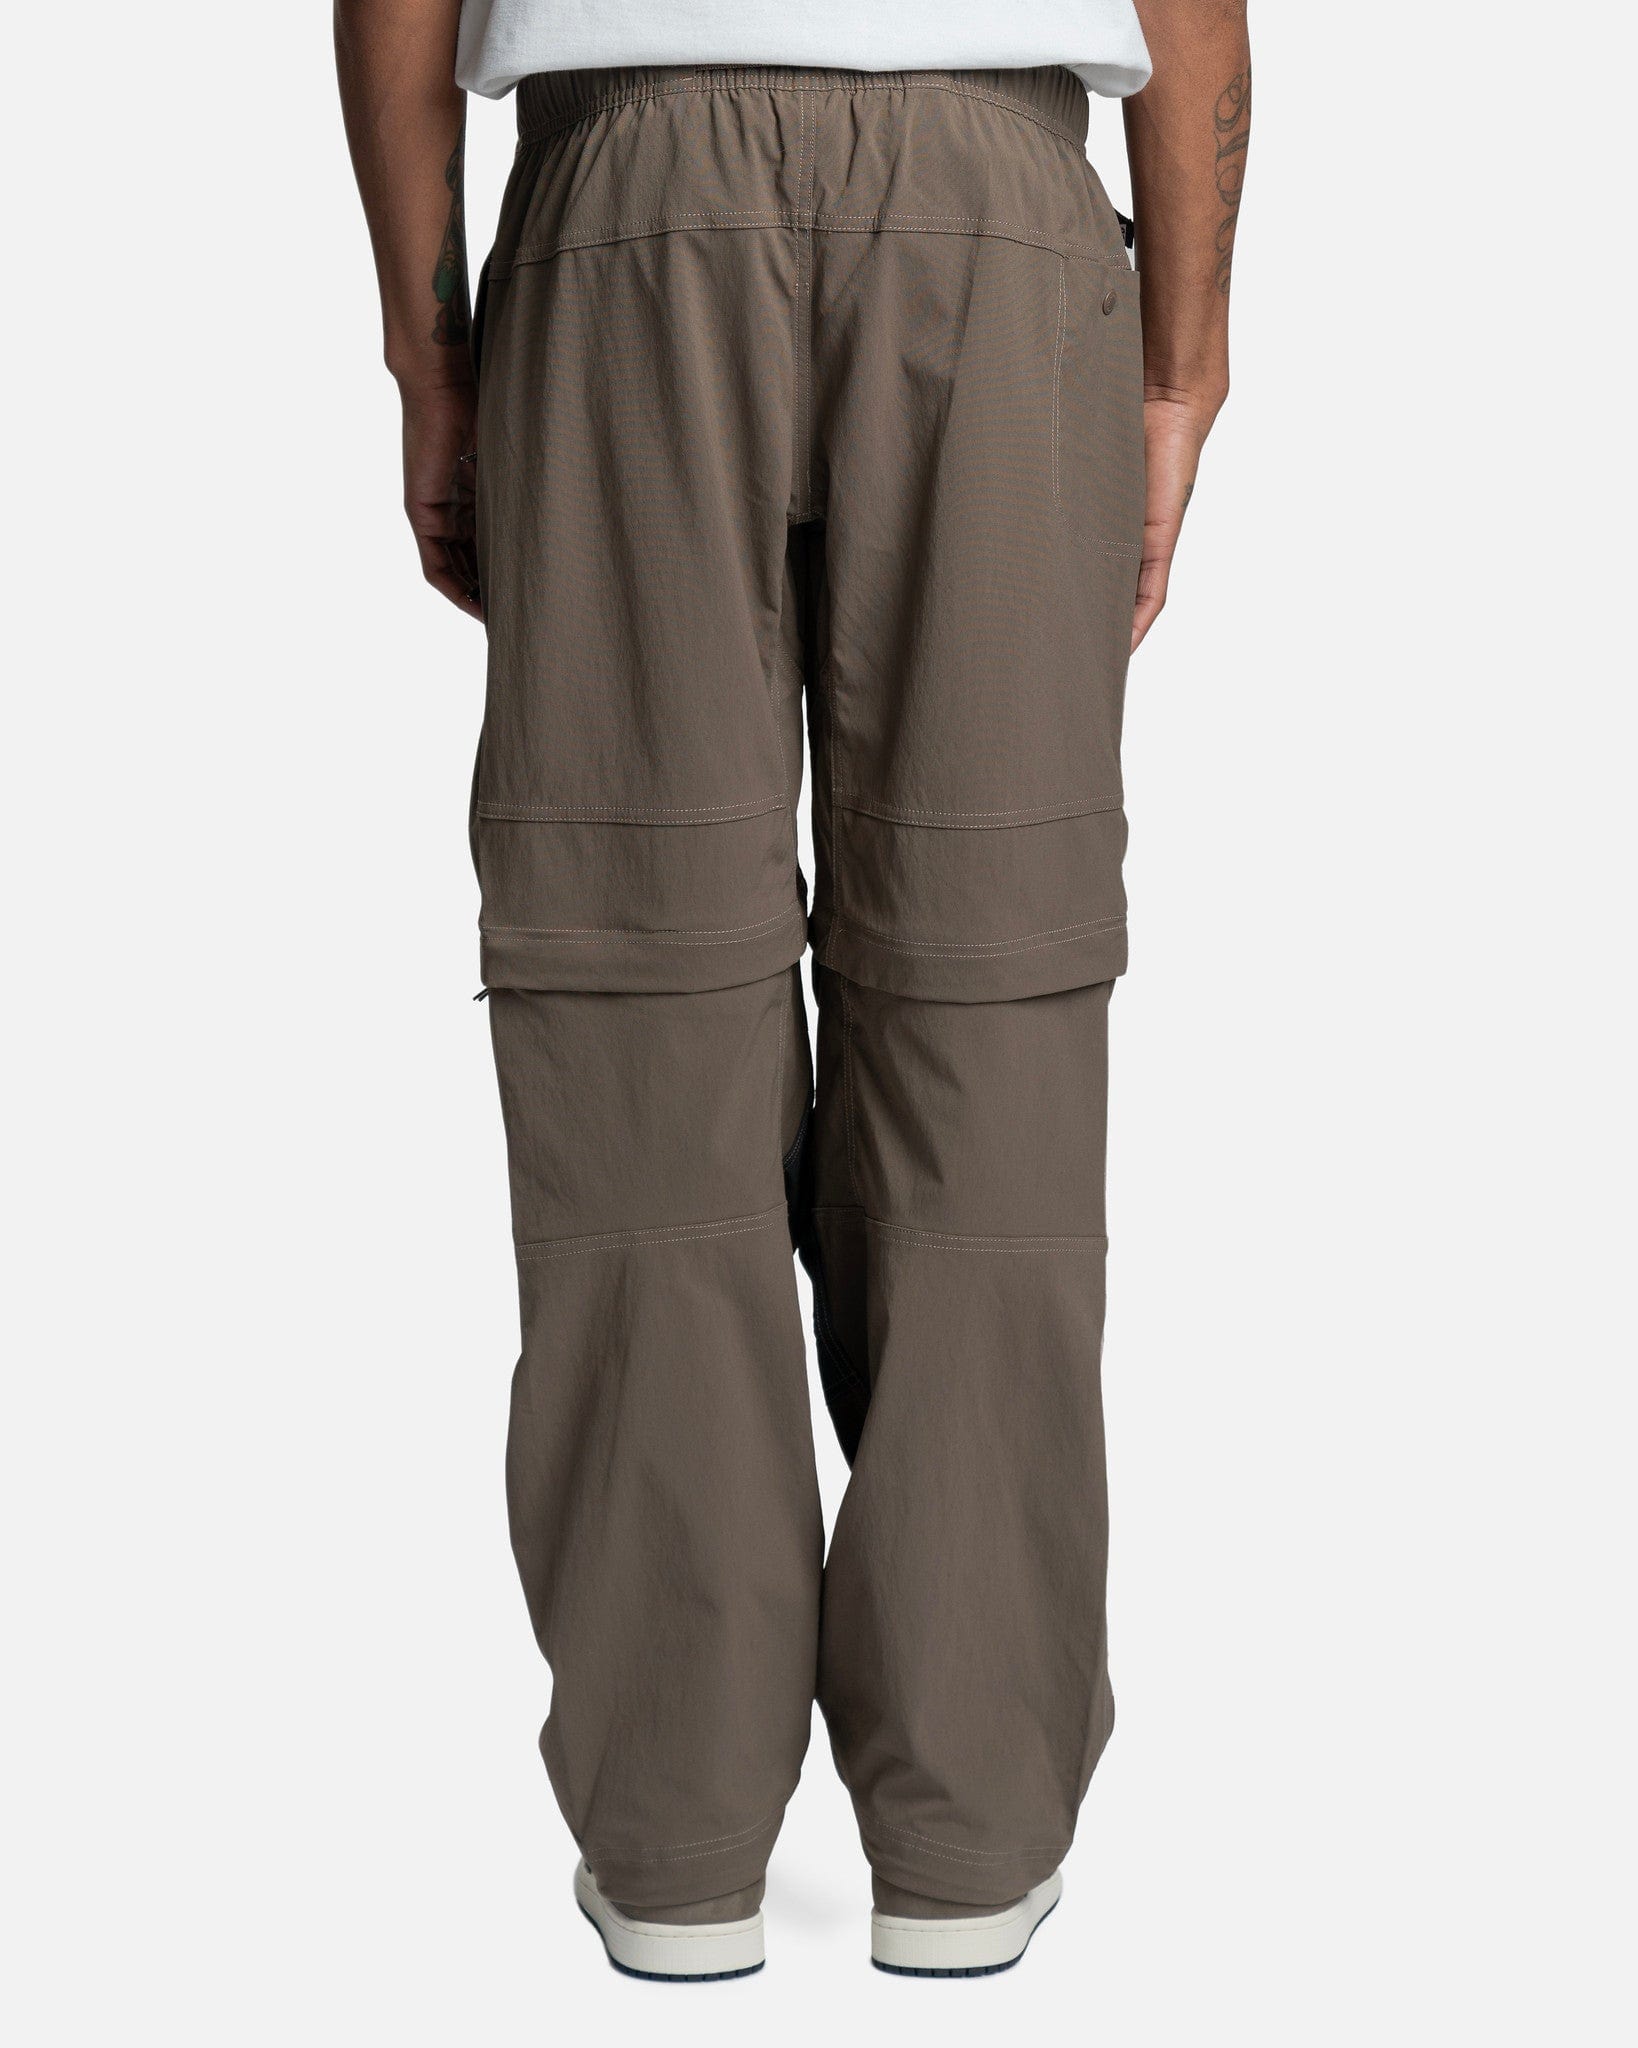 ACG Smith Summit Cargo Pants in Brown